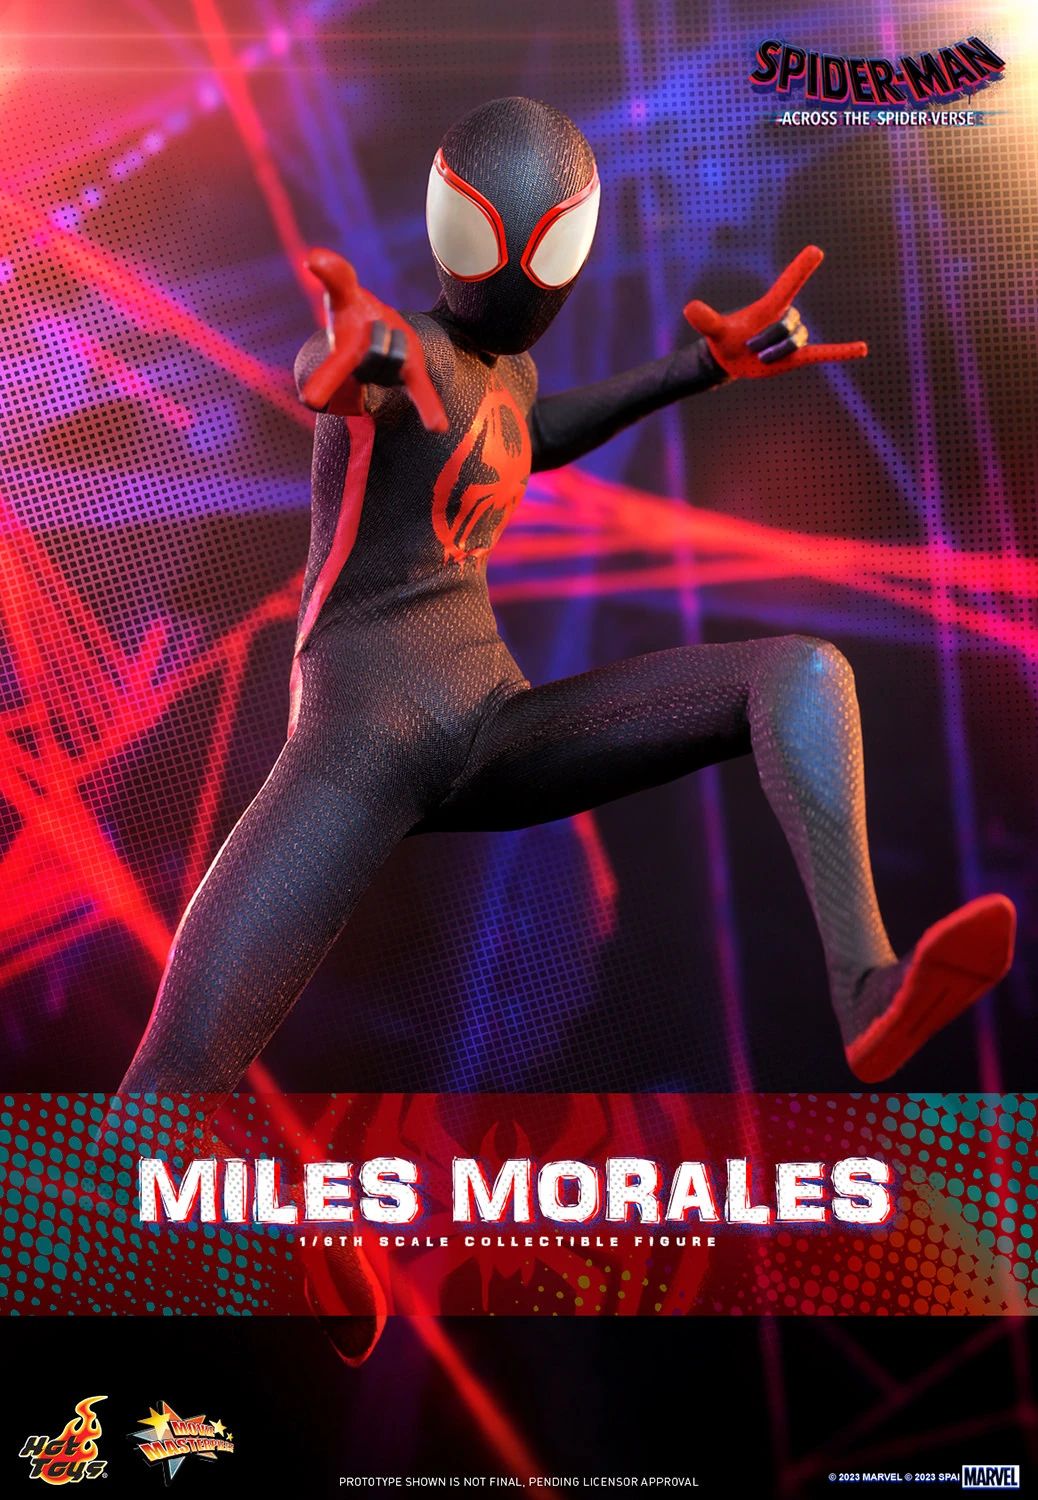 Hot Toys Marvel Miles Morales Spider Man Across The Spider Verse